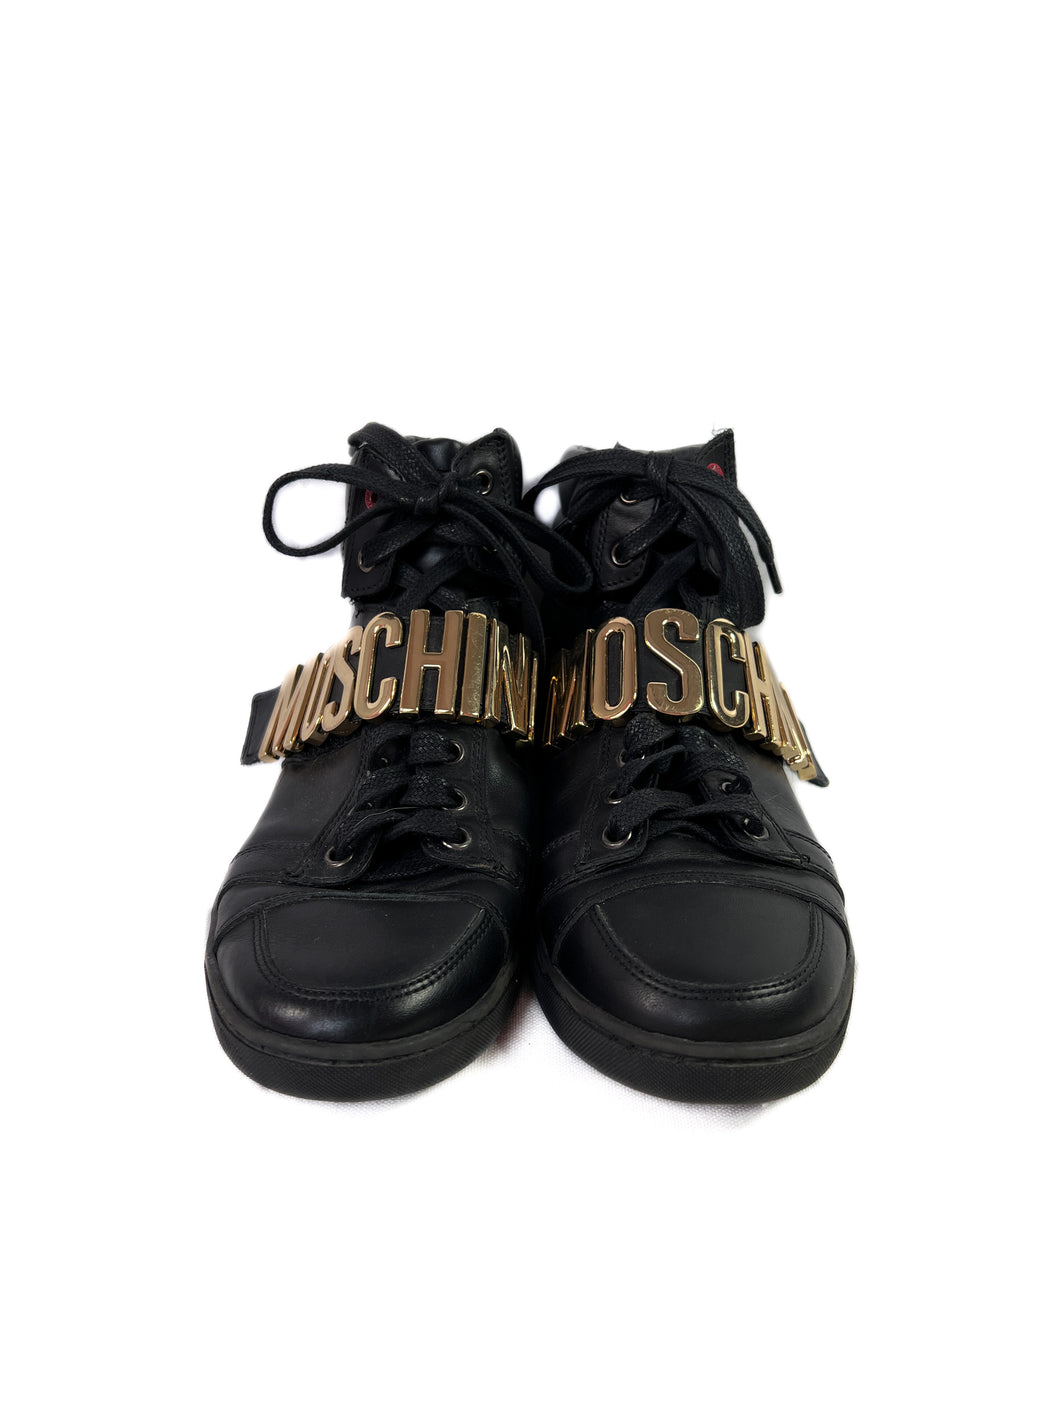 Moschino black leather high top sneakers size – My Girlfriend's Wardrobe LLC